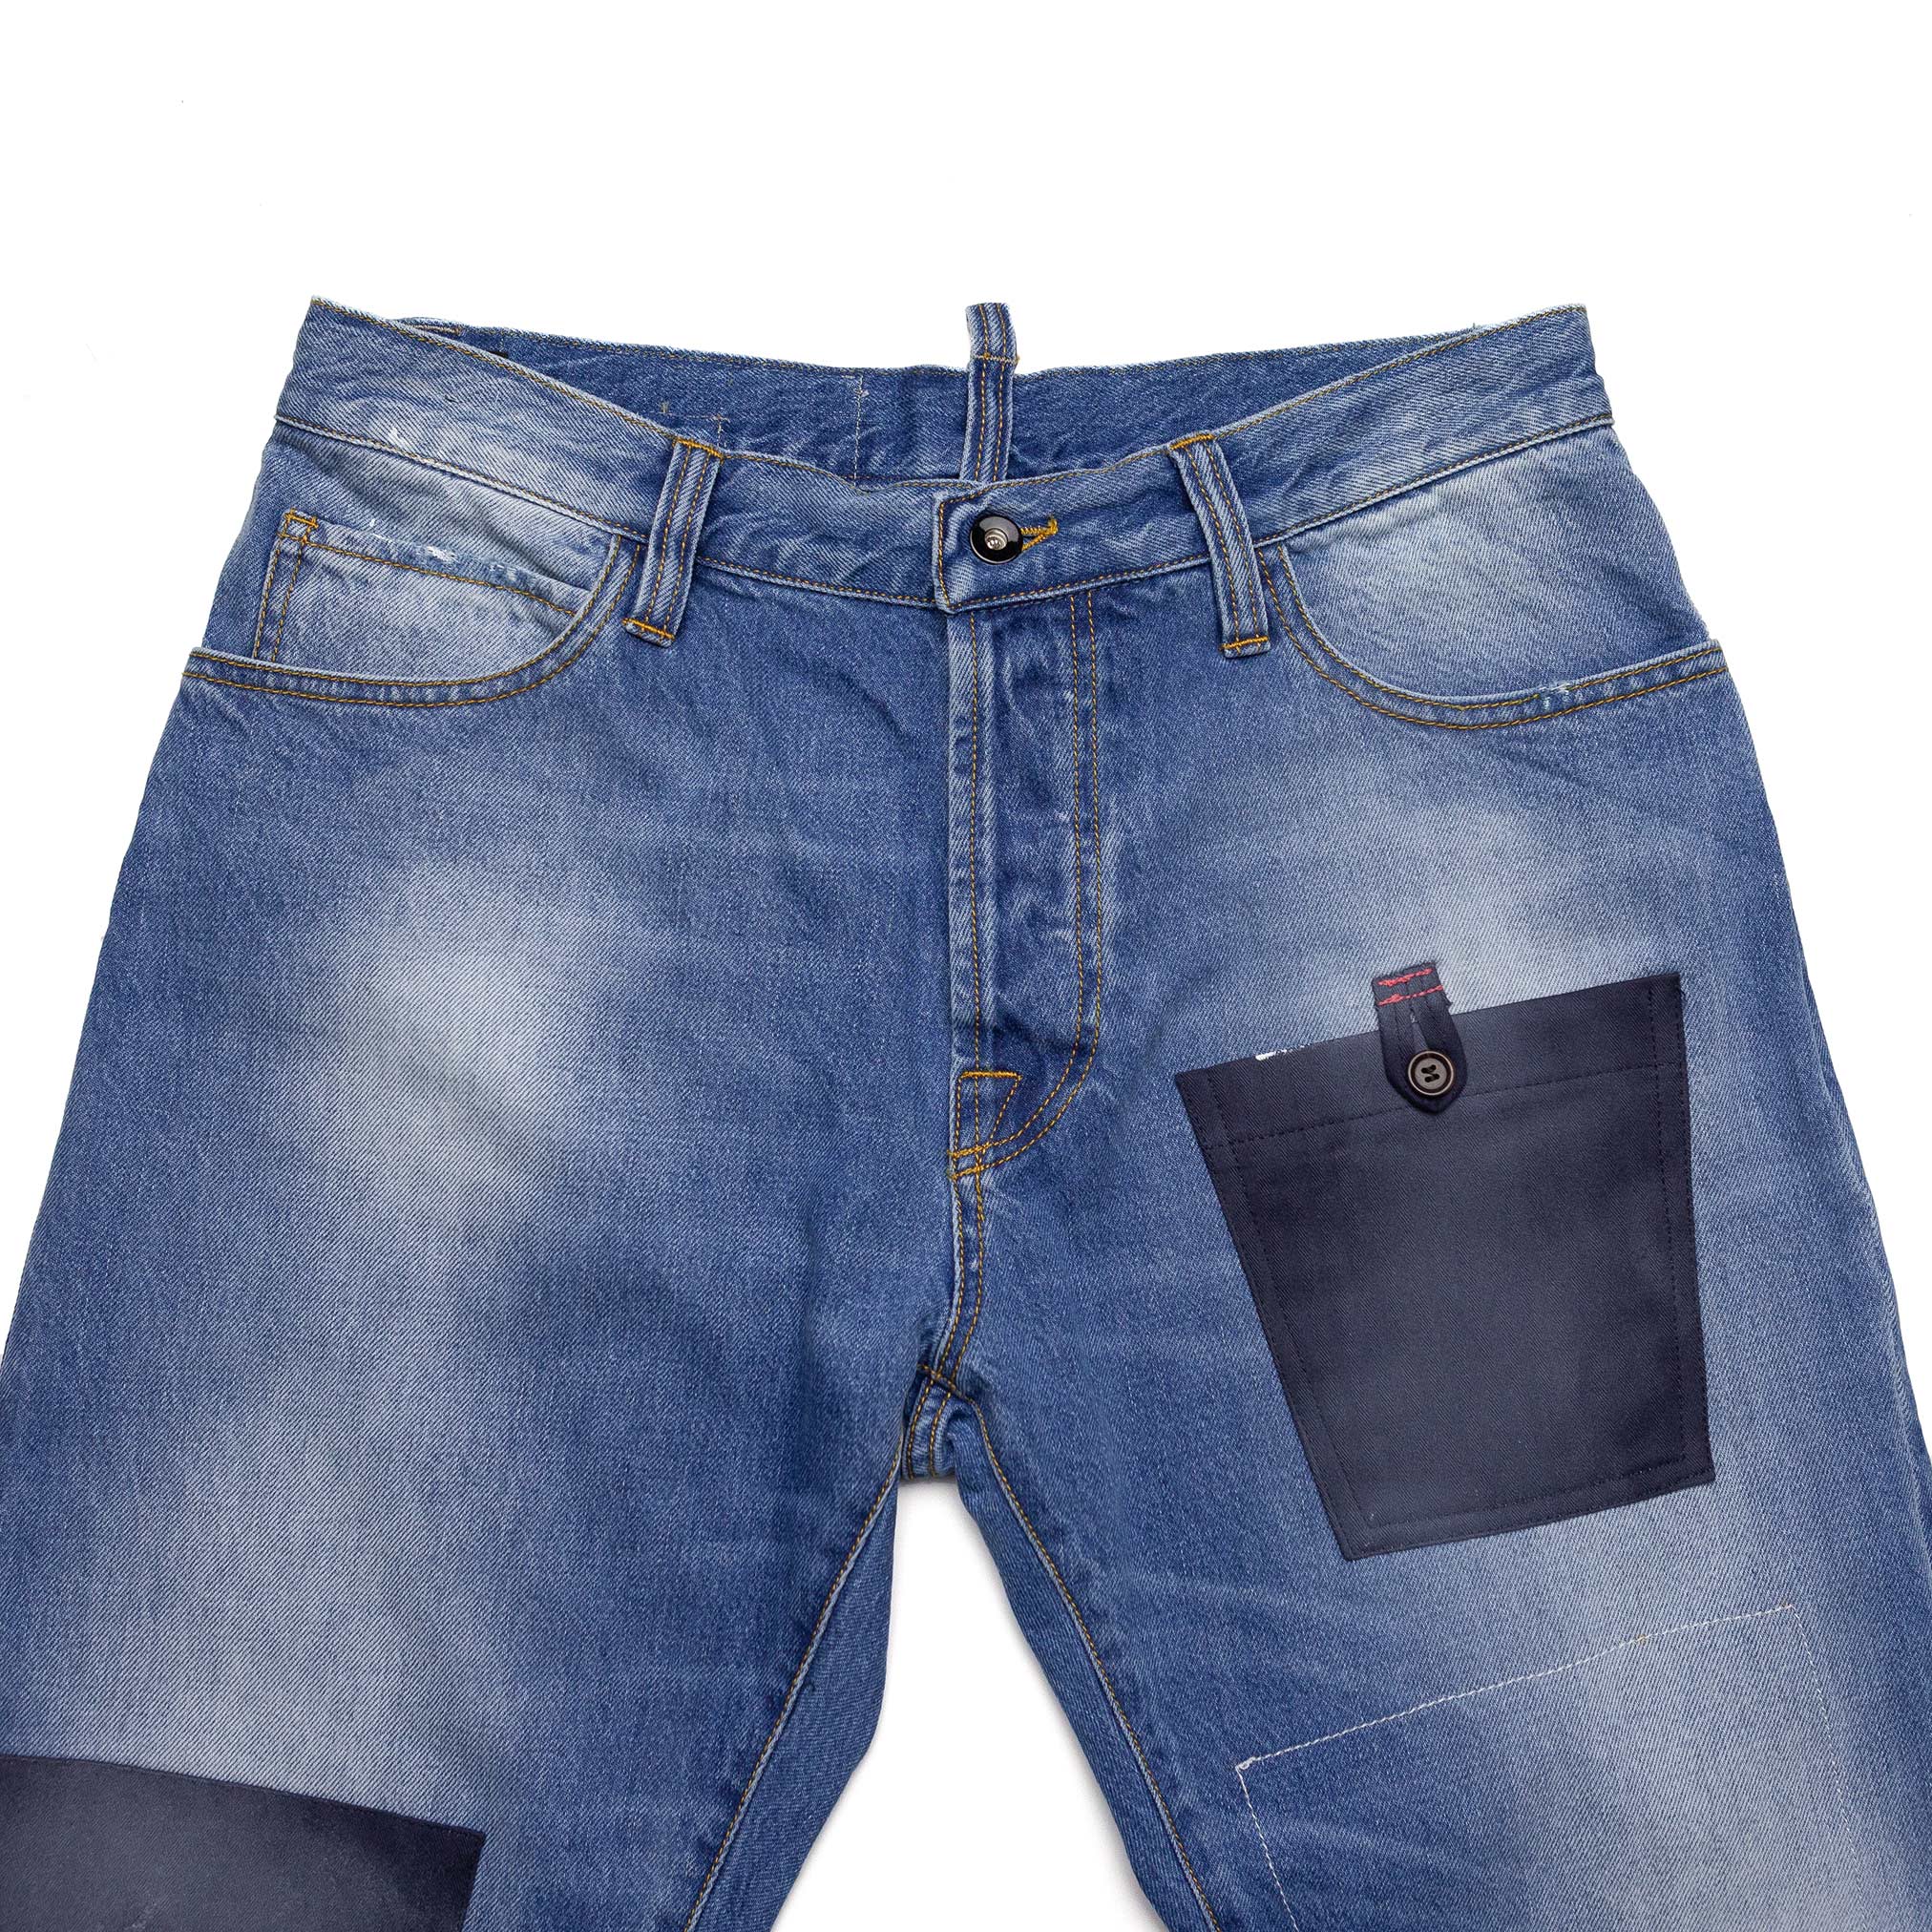 Crug 234 Patch Jeans